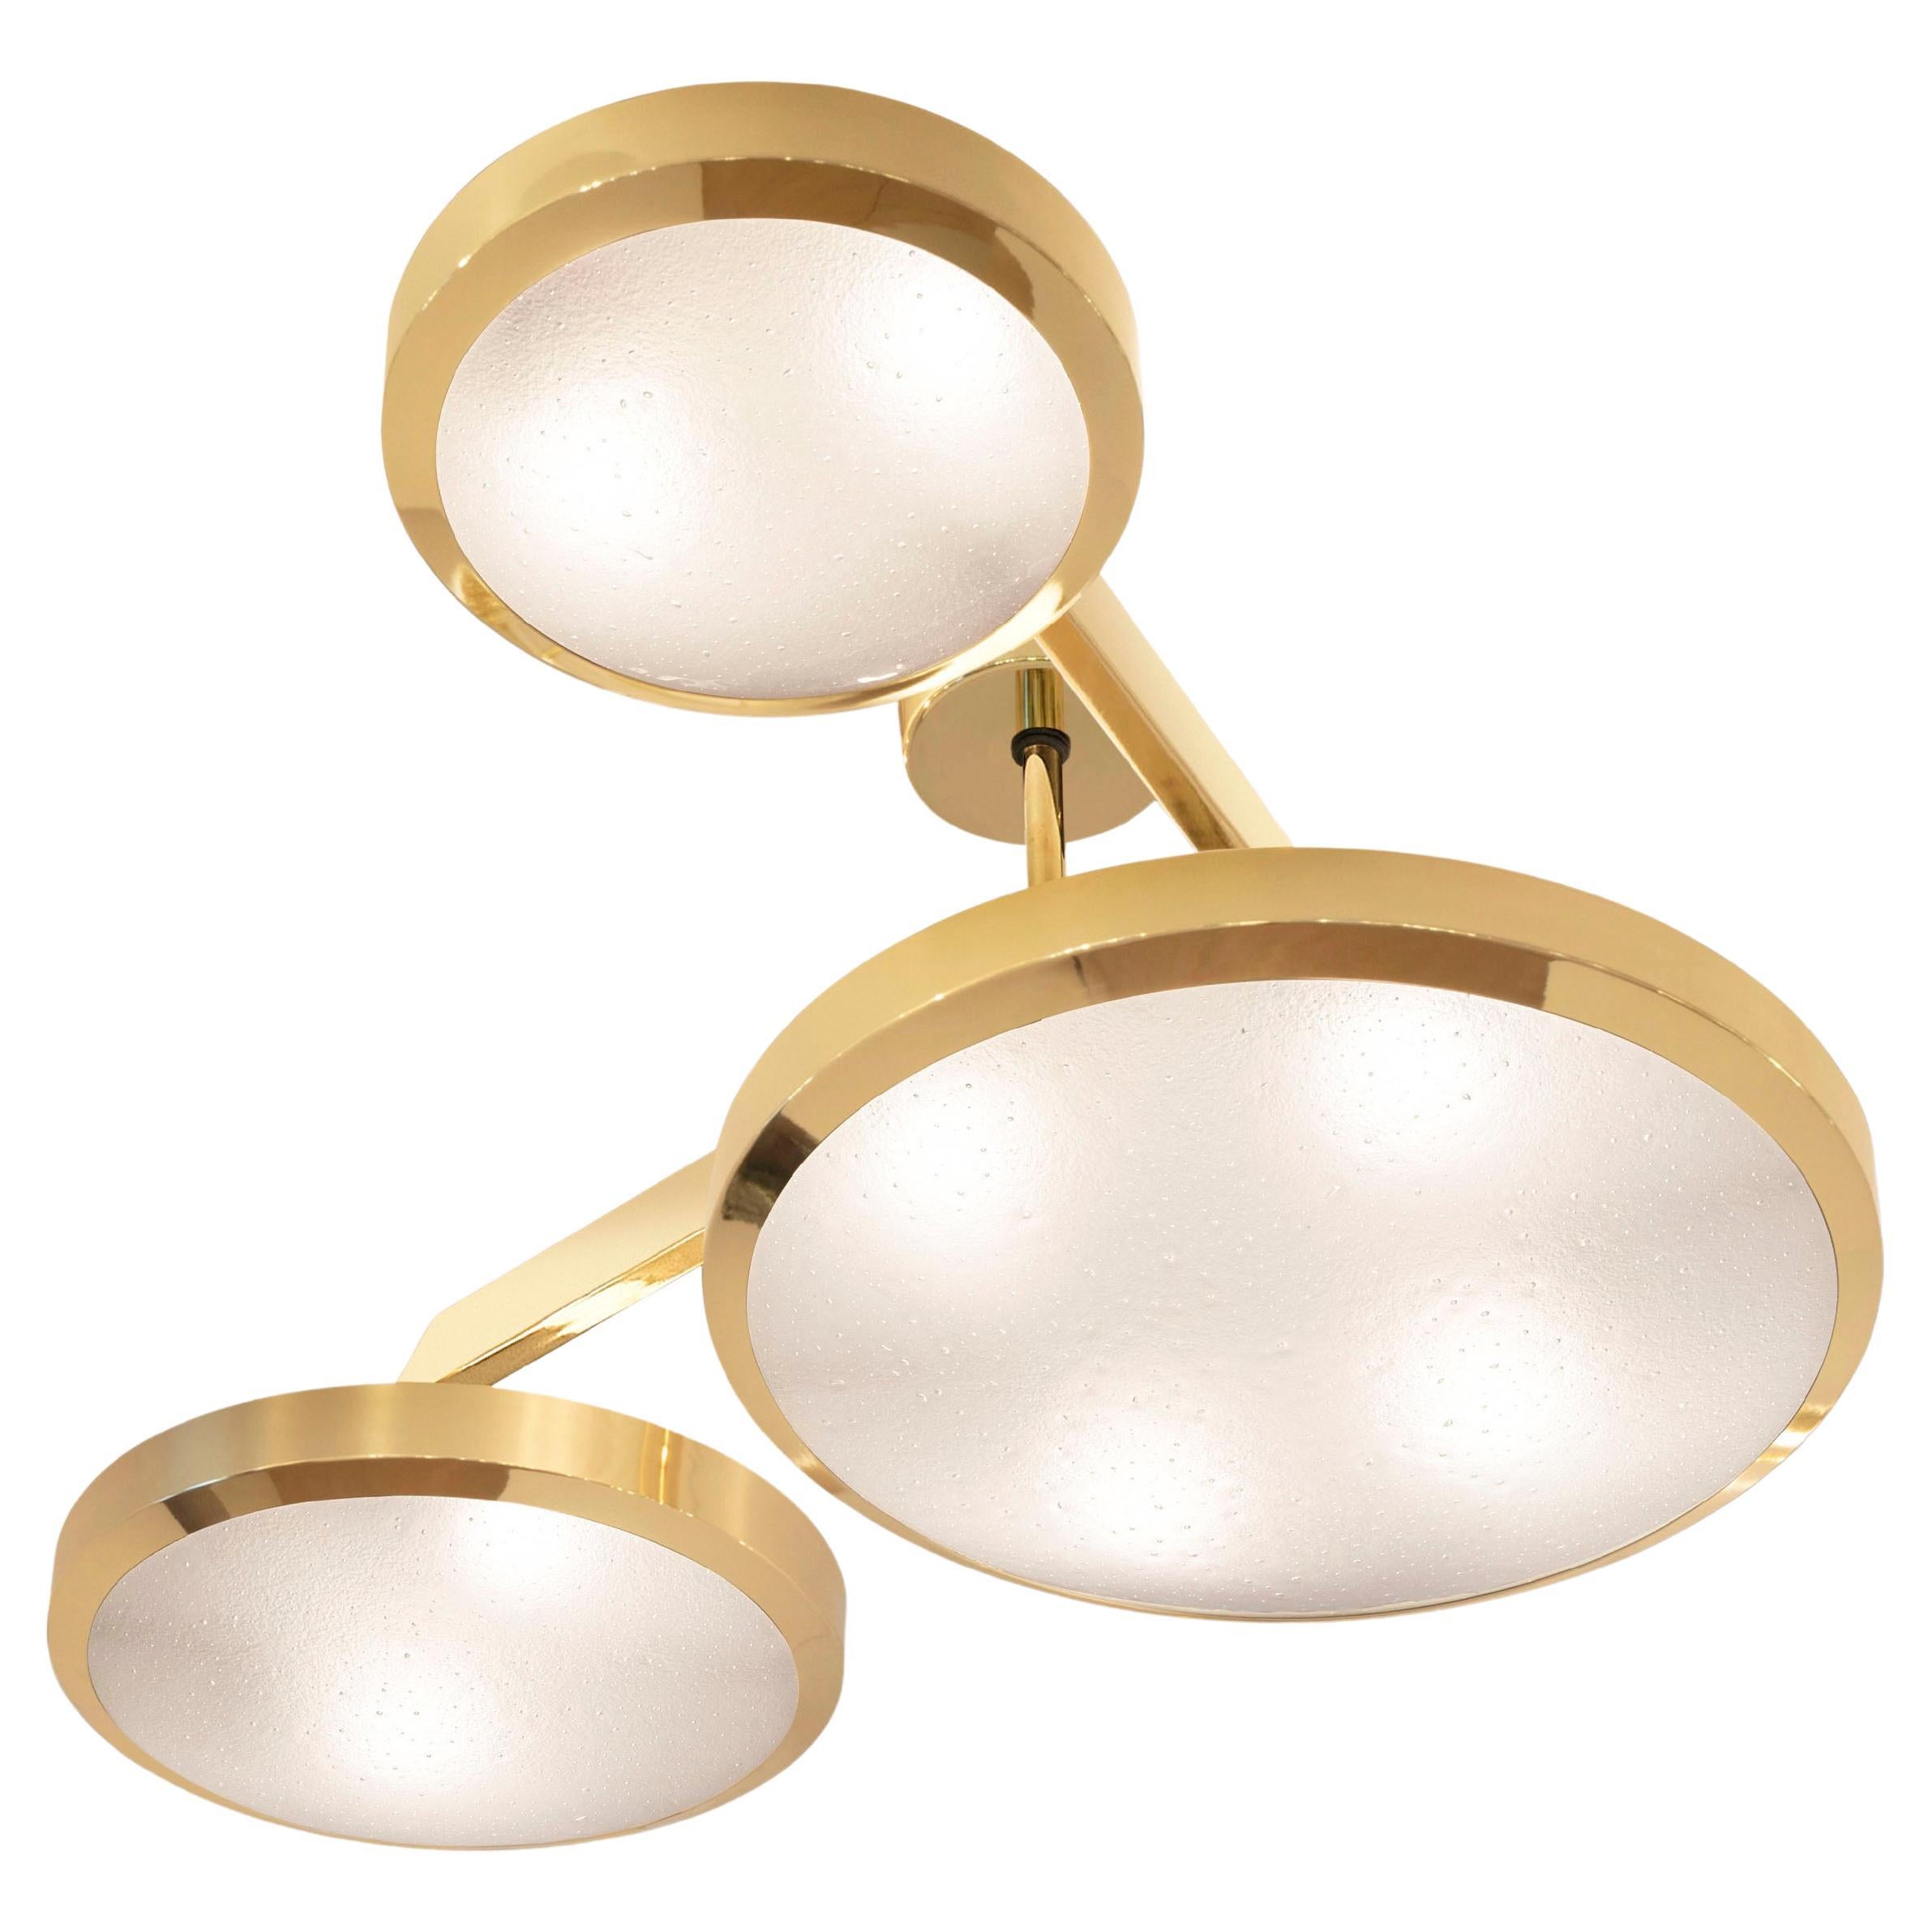 Zeta Ceiling Light by Gaspare Asaro - Polished Brass Finish For Sale